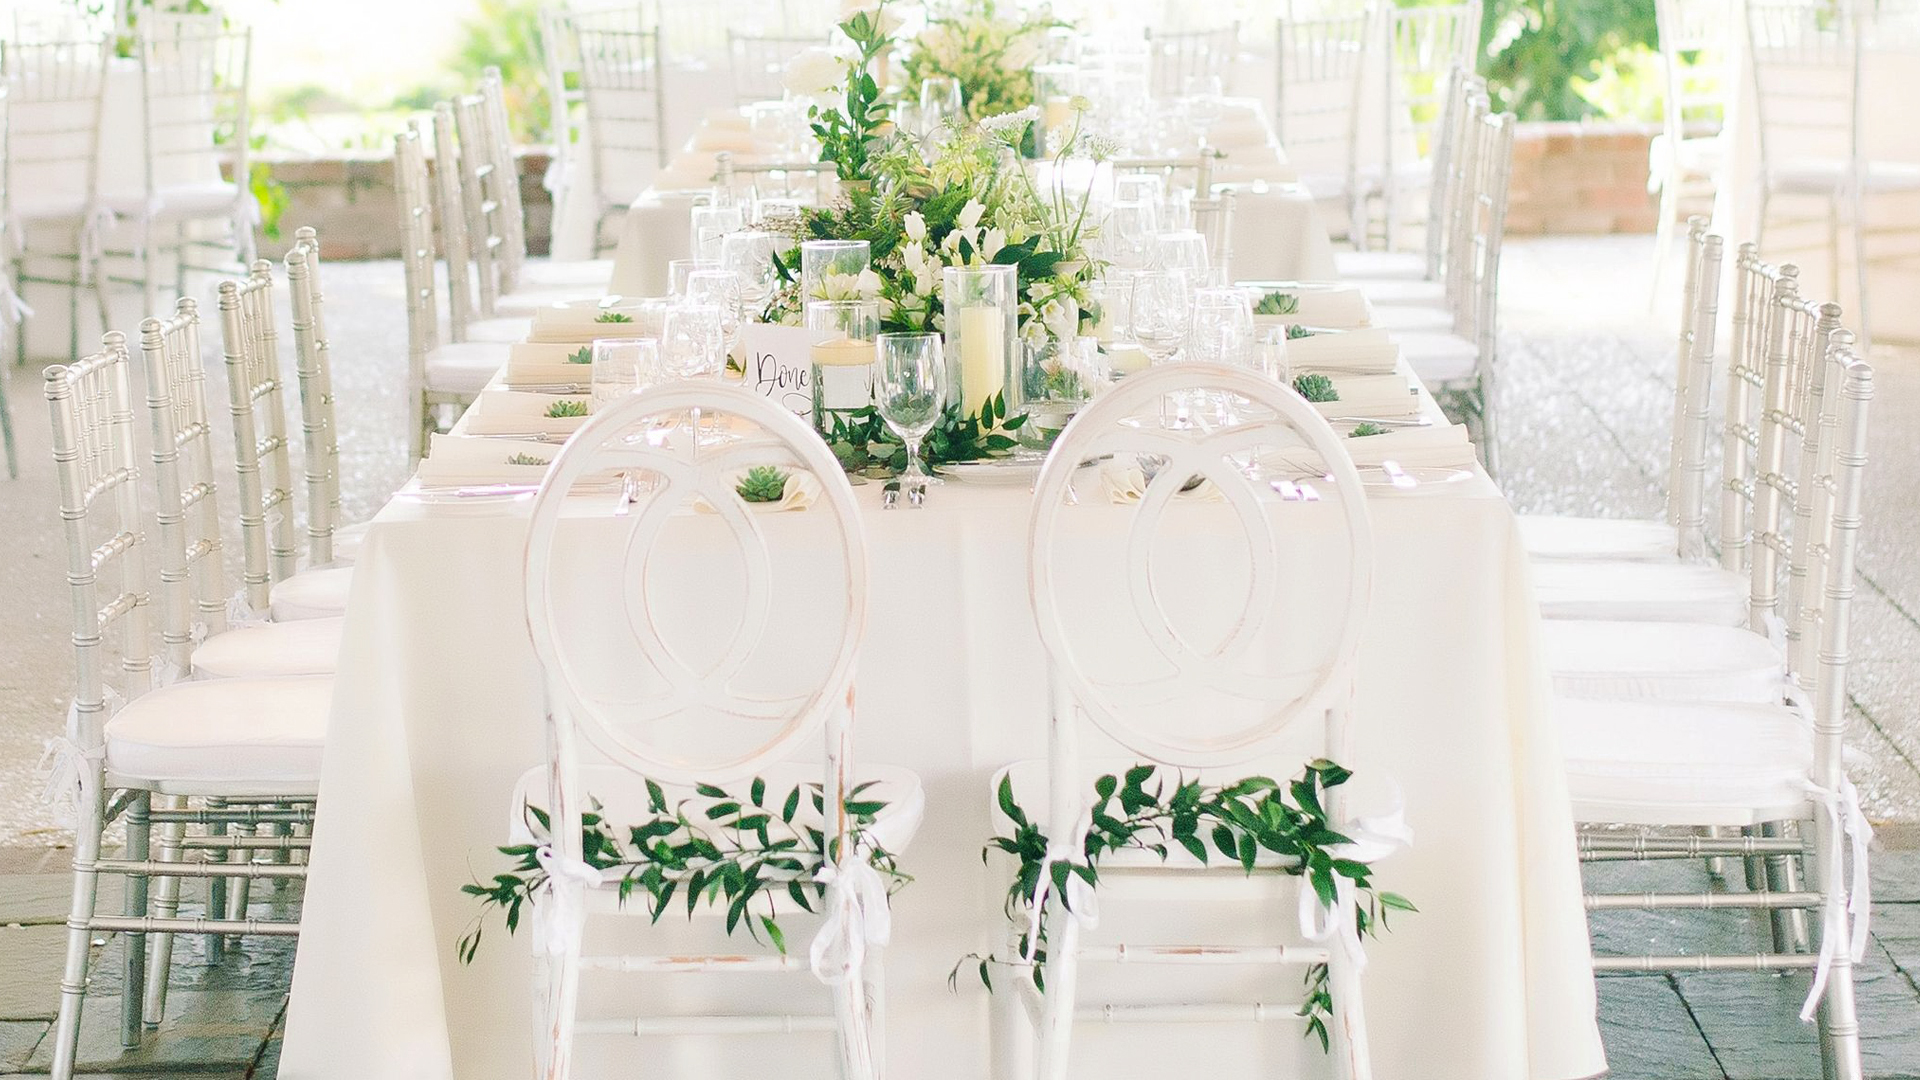 Romantic Wedding Style Ideas - We Know You're Going To Have A Super Sweet Celebration, But If You're Looking For Something That's Over-The-Top Romantic